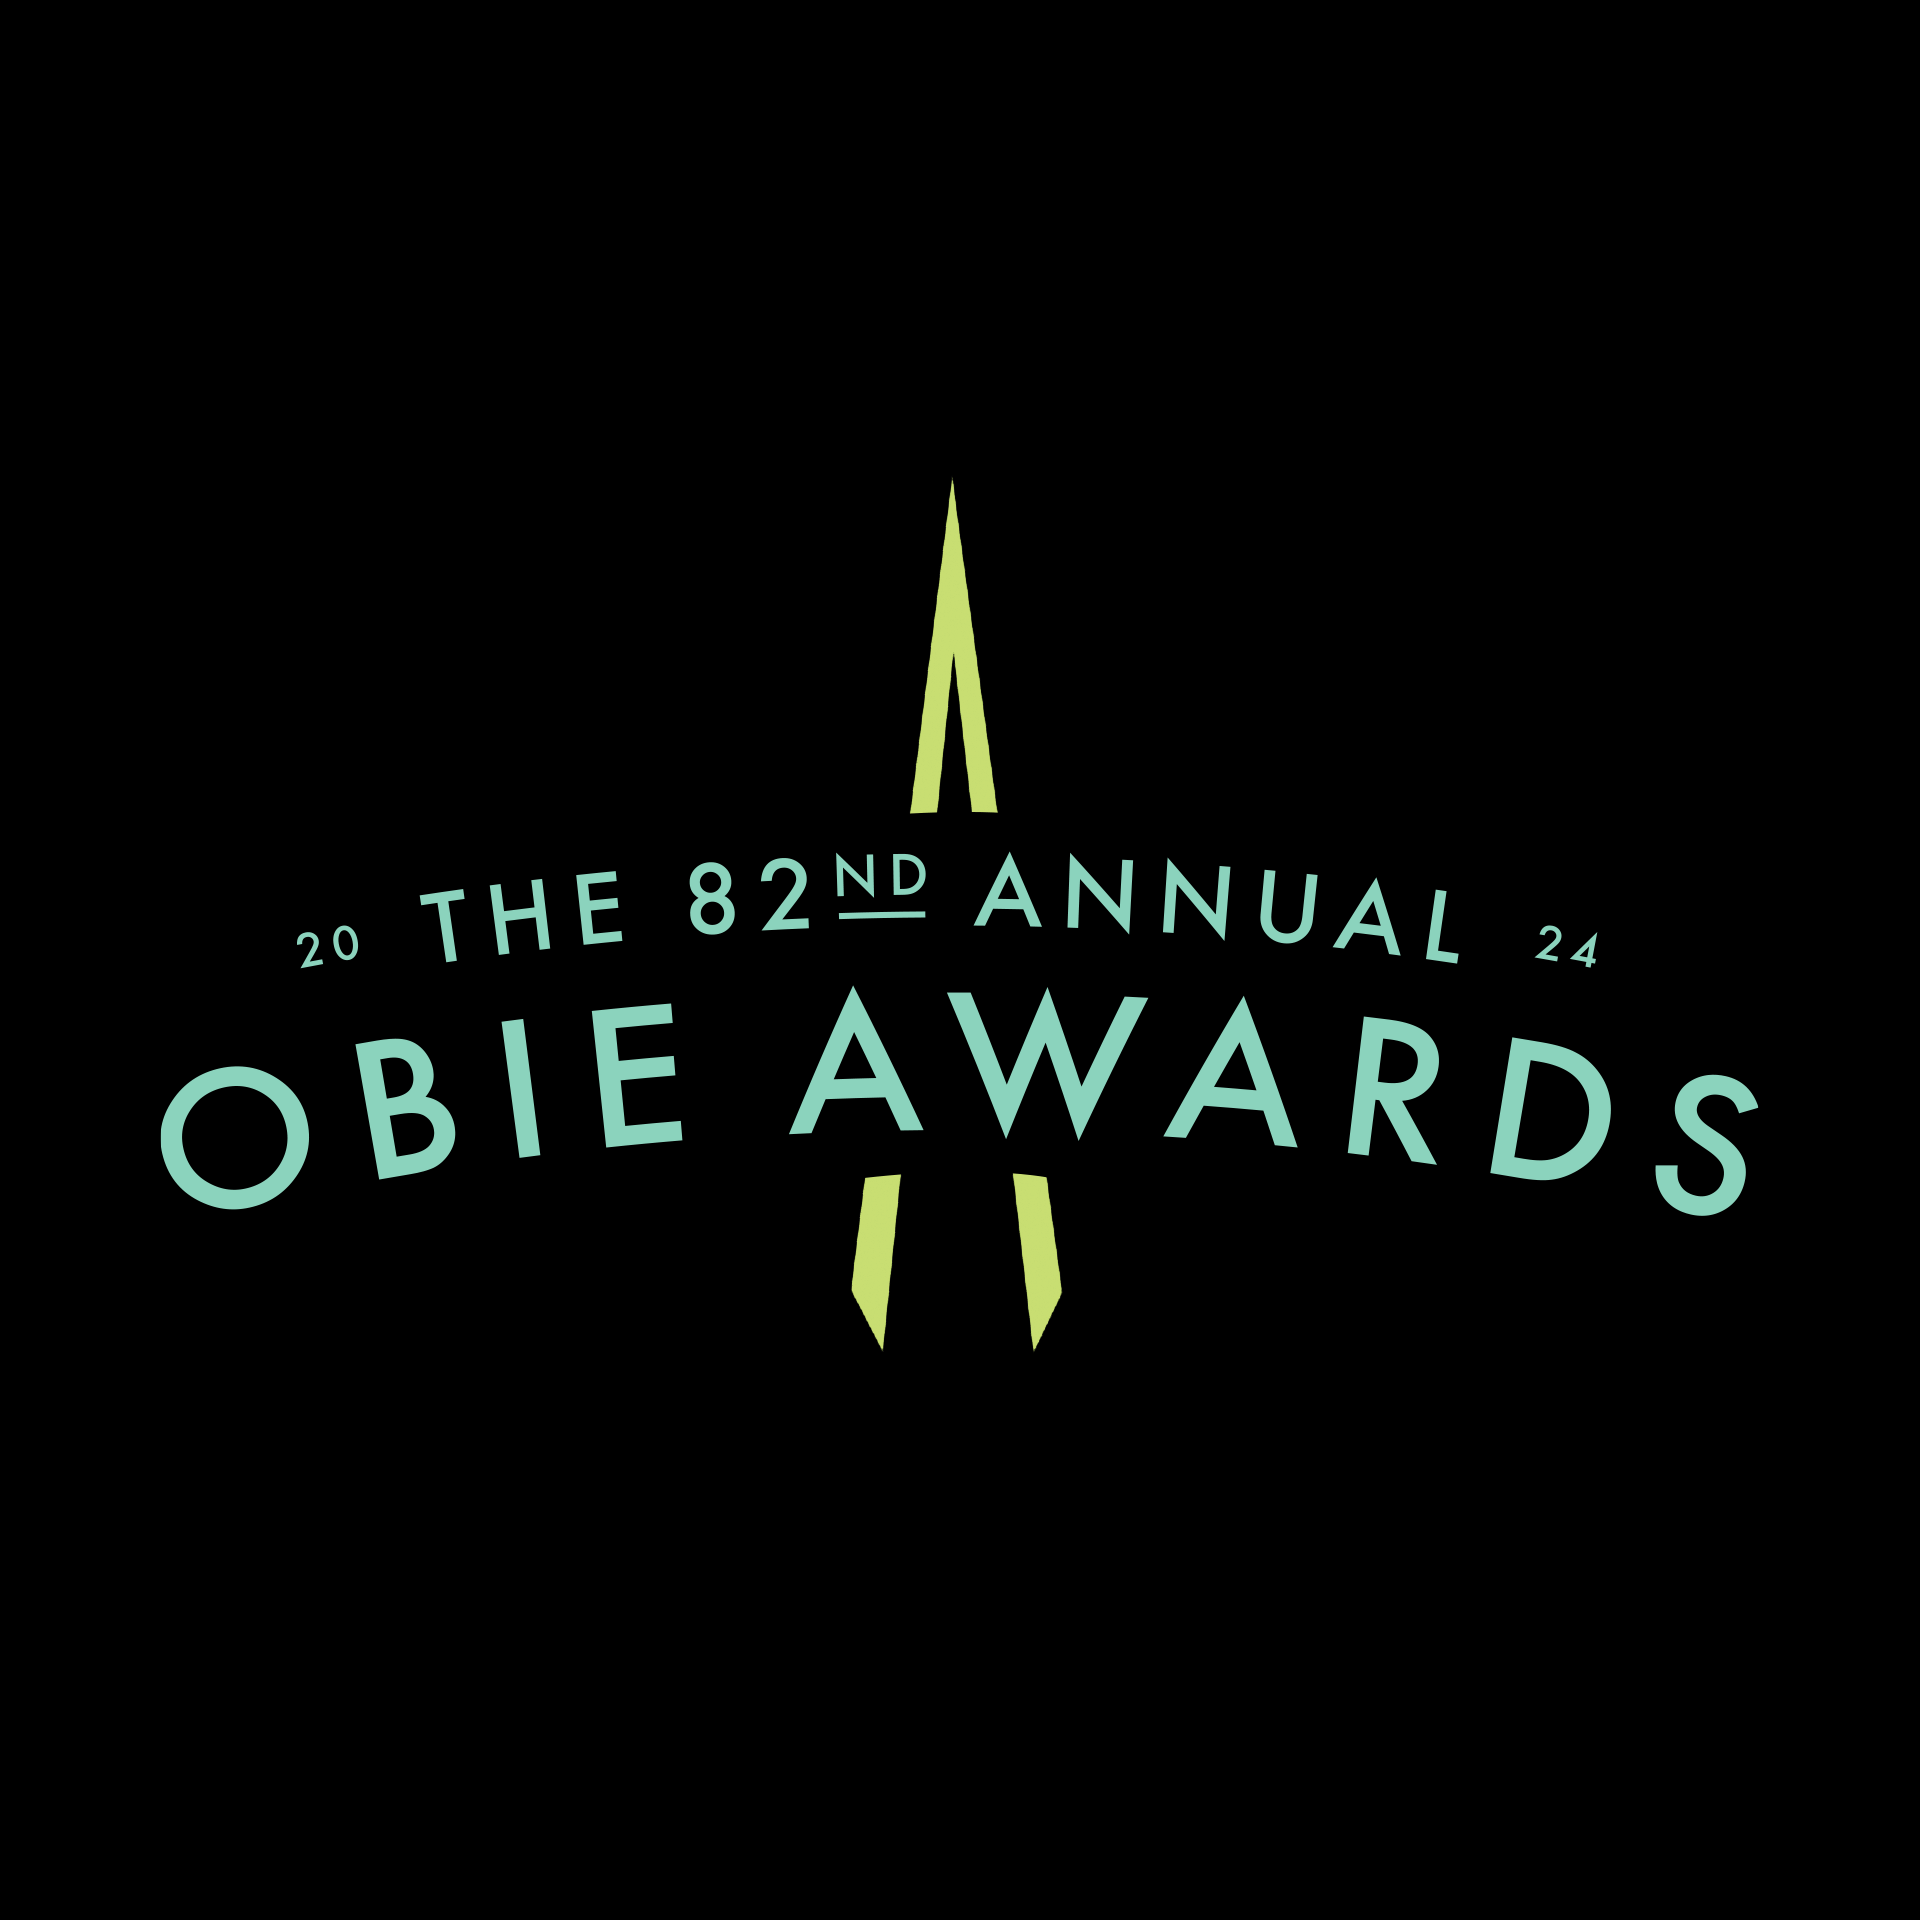 OAAA Reveals Winners Of 82nd Annual OBIE Awards, Dunkin’ Named As Newest OBIE Hall Of Fame Inductee